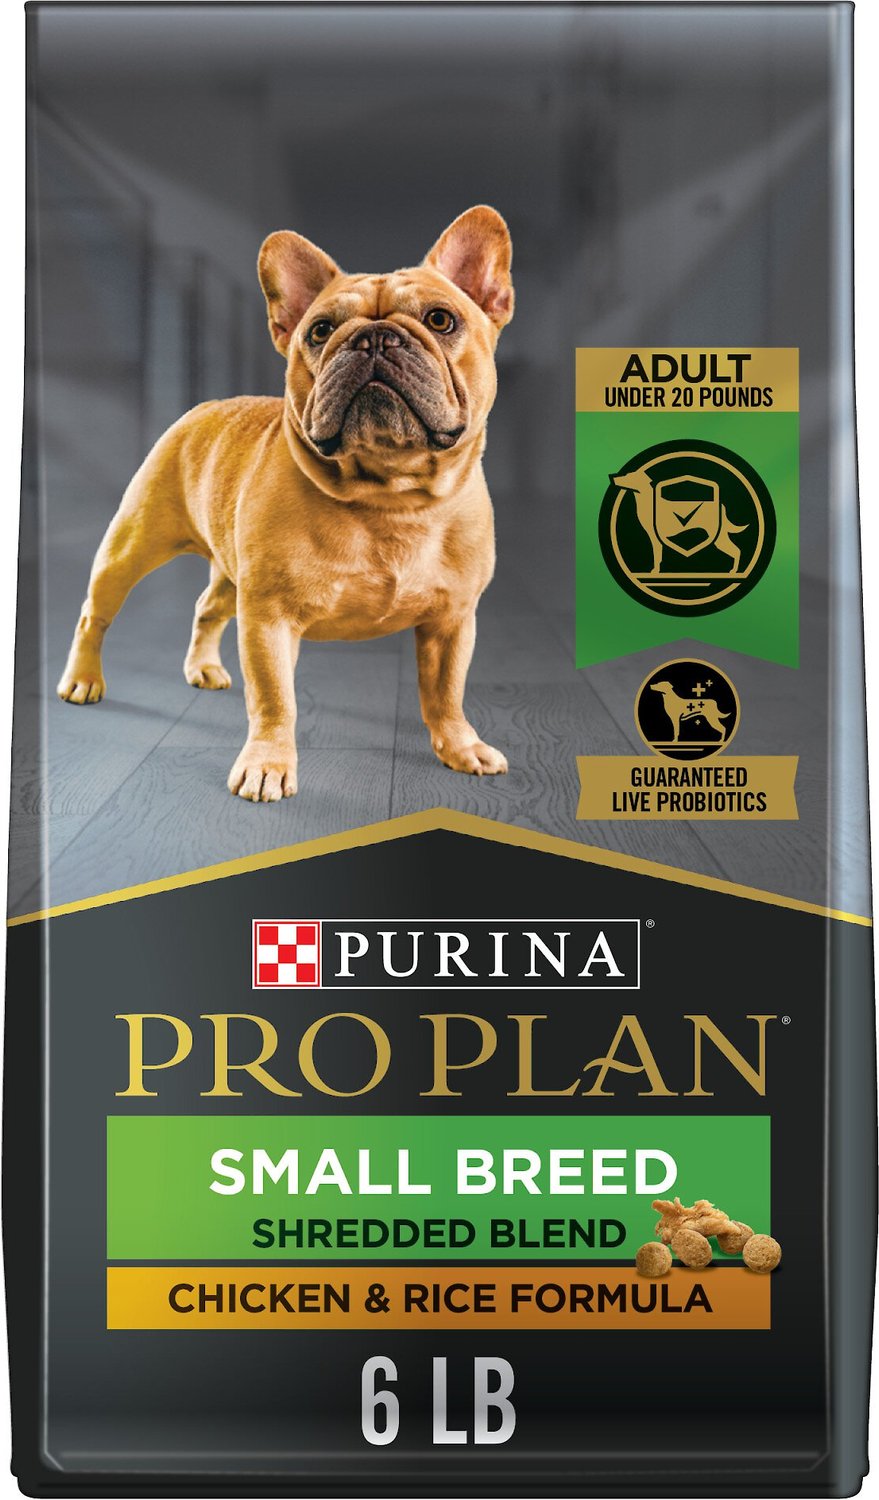 Purina Pro Plan Shredded Blend Adult Small Breed Chicken & Rice Formula Dog Food